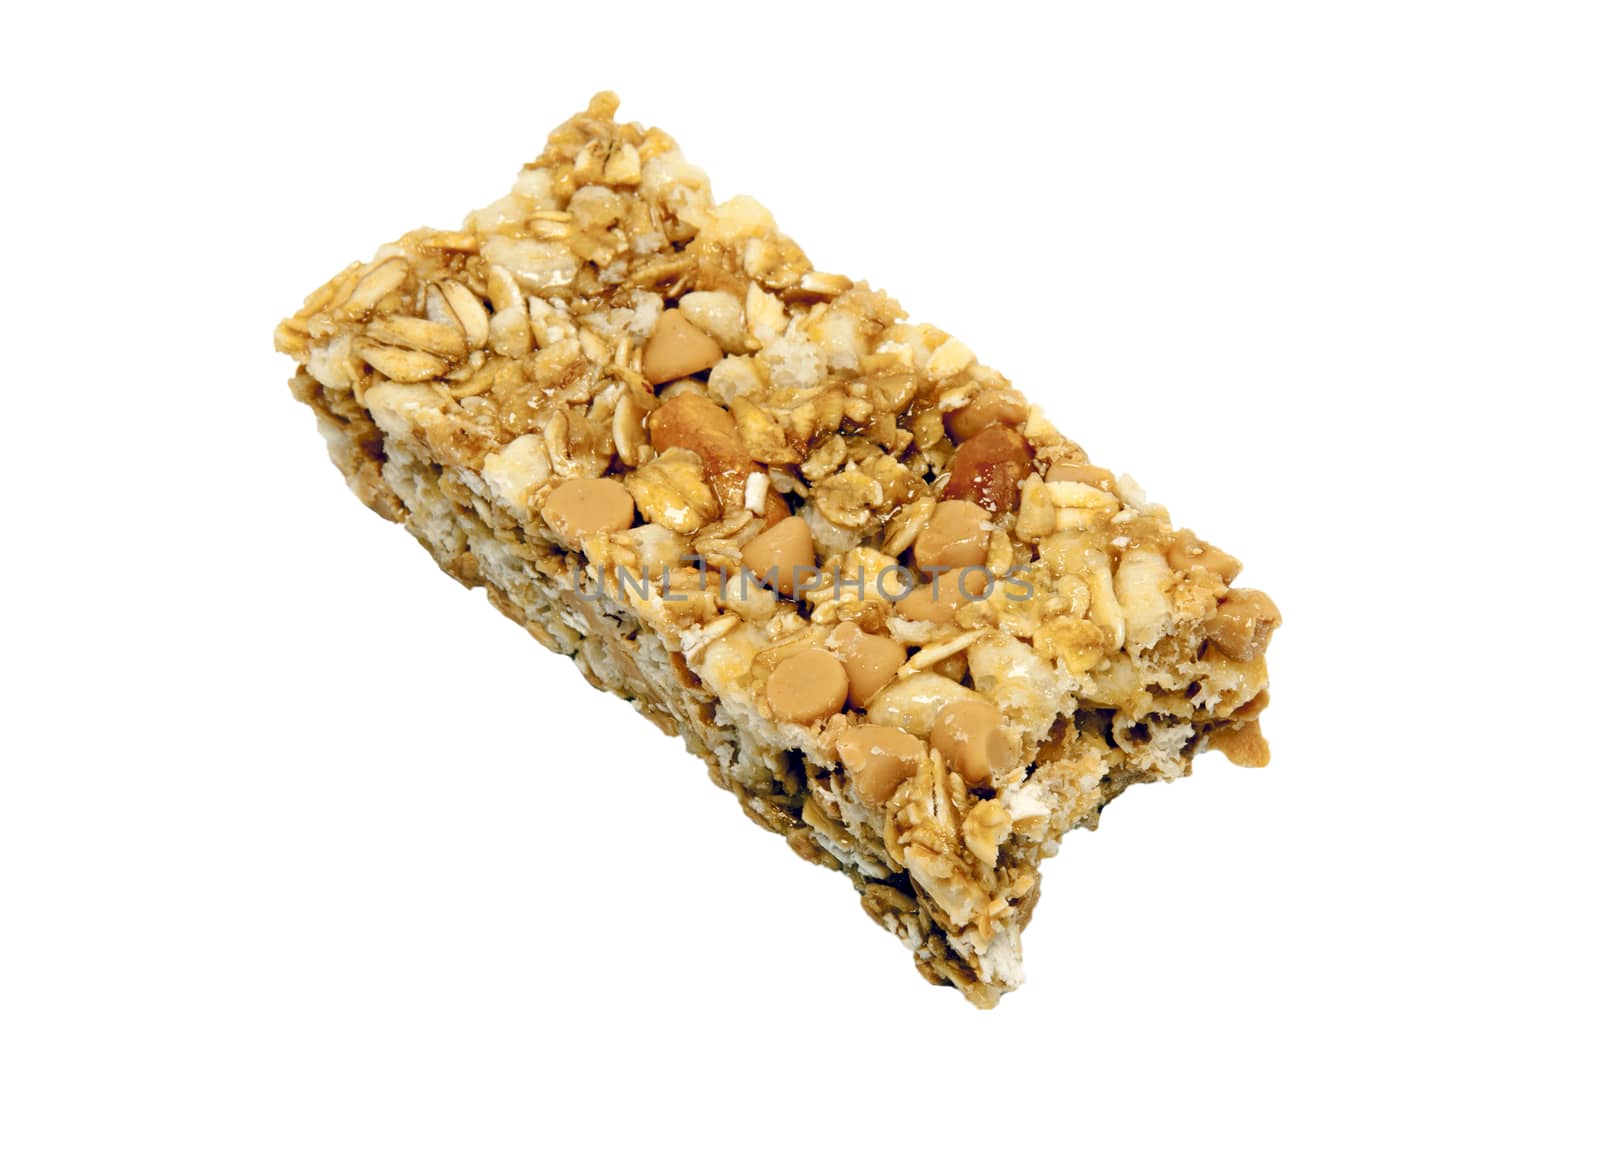 Delicious Chewy Granola Bar With Bite Taken Out by stockbuster1